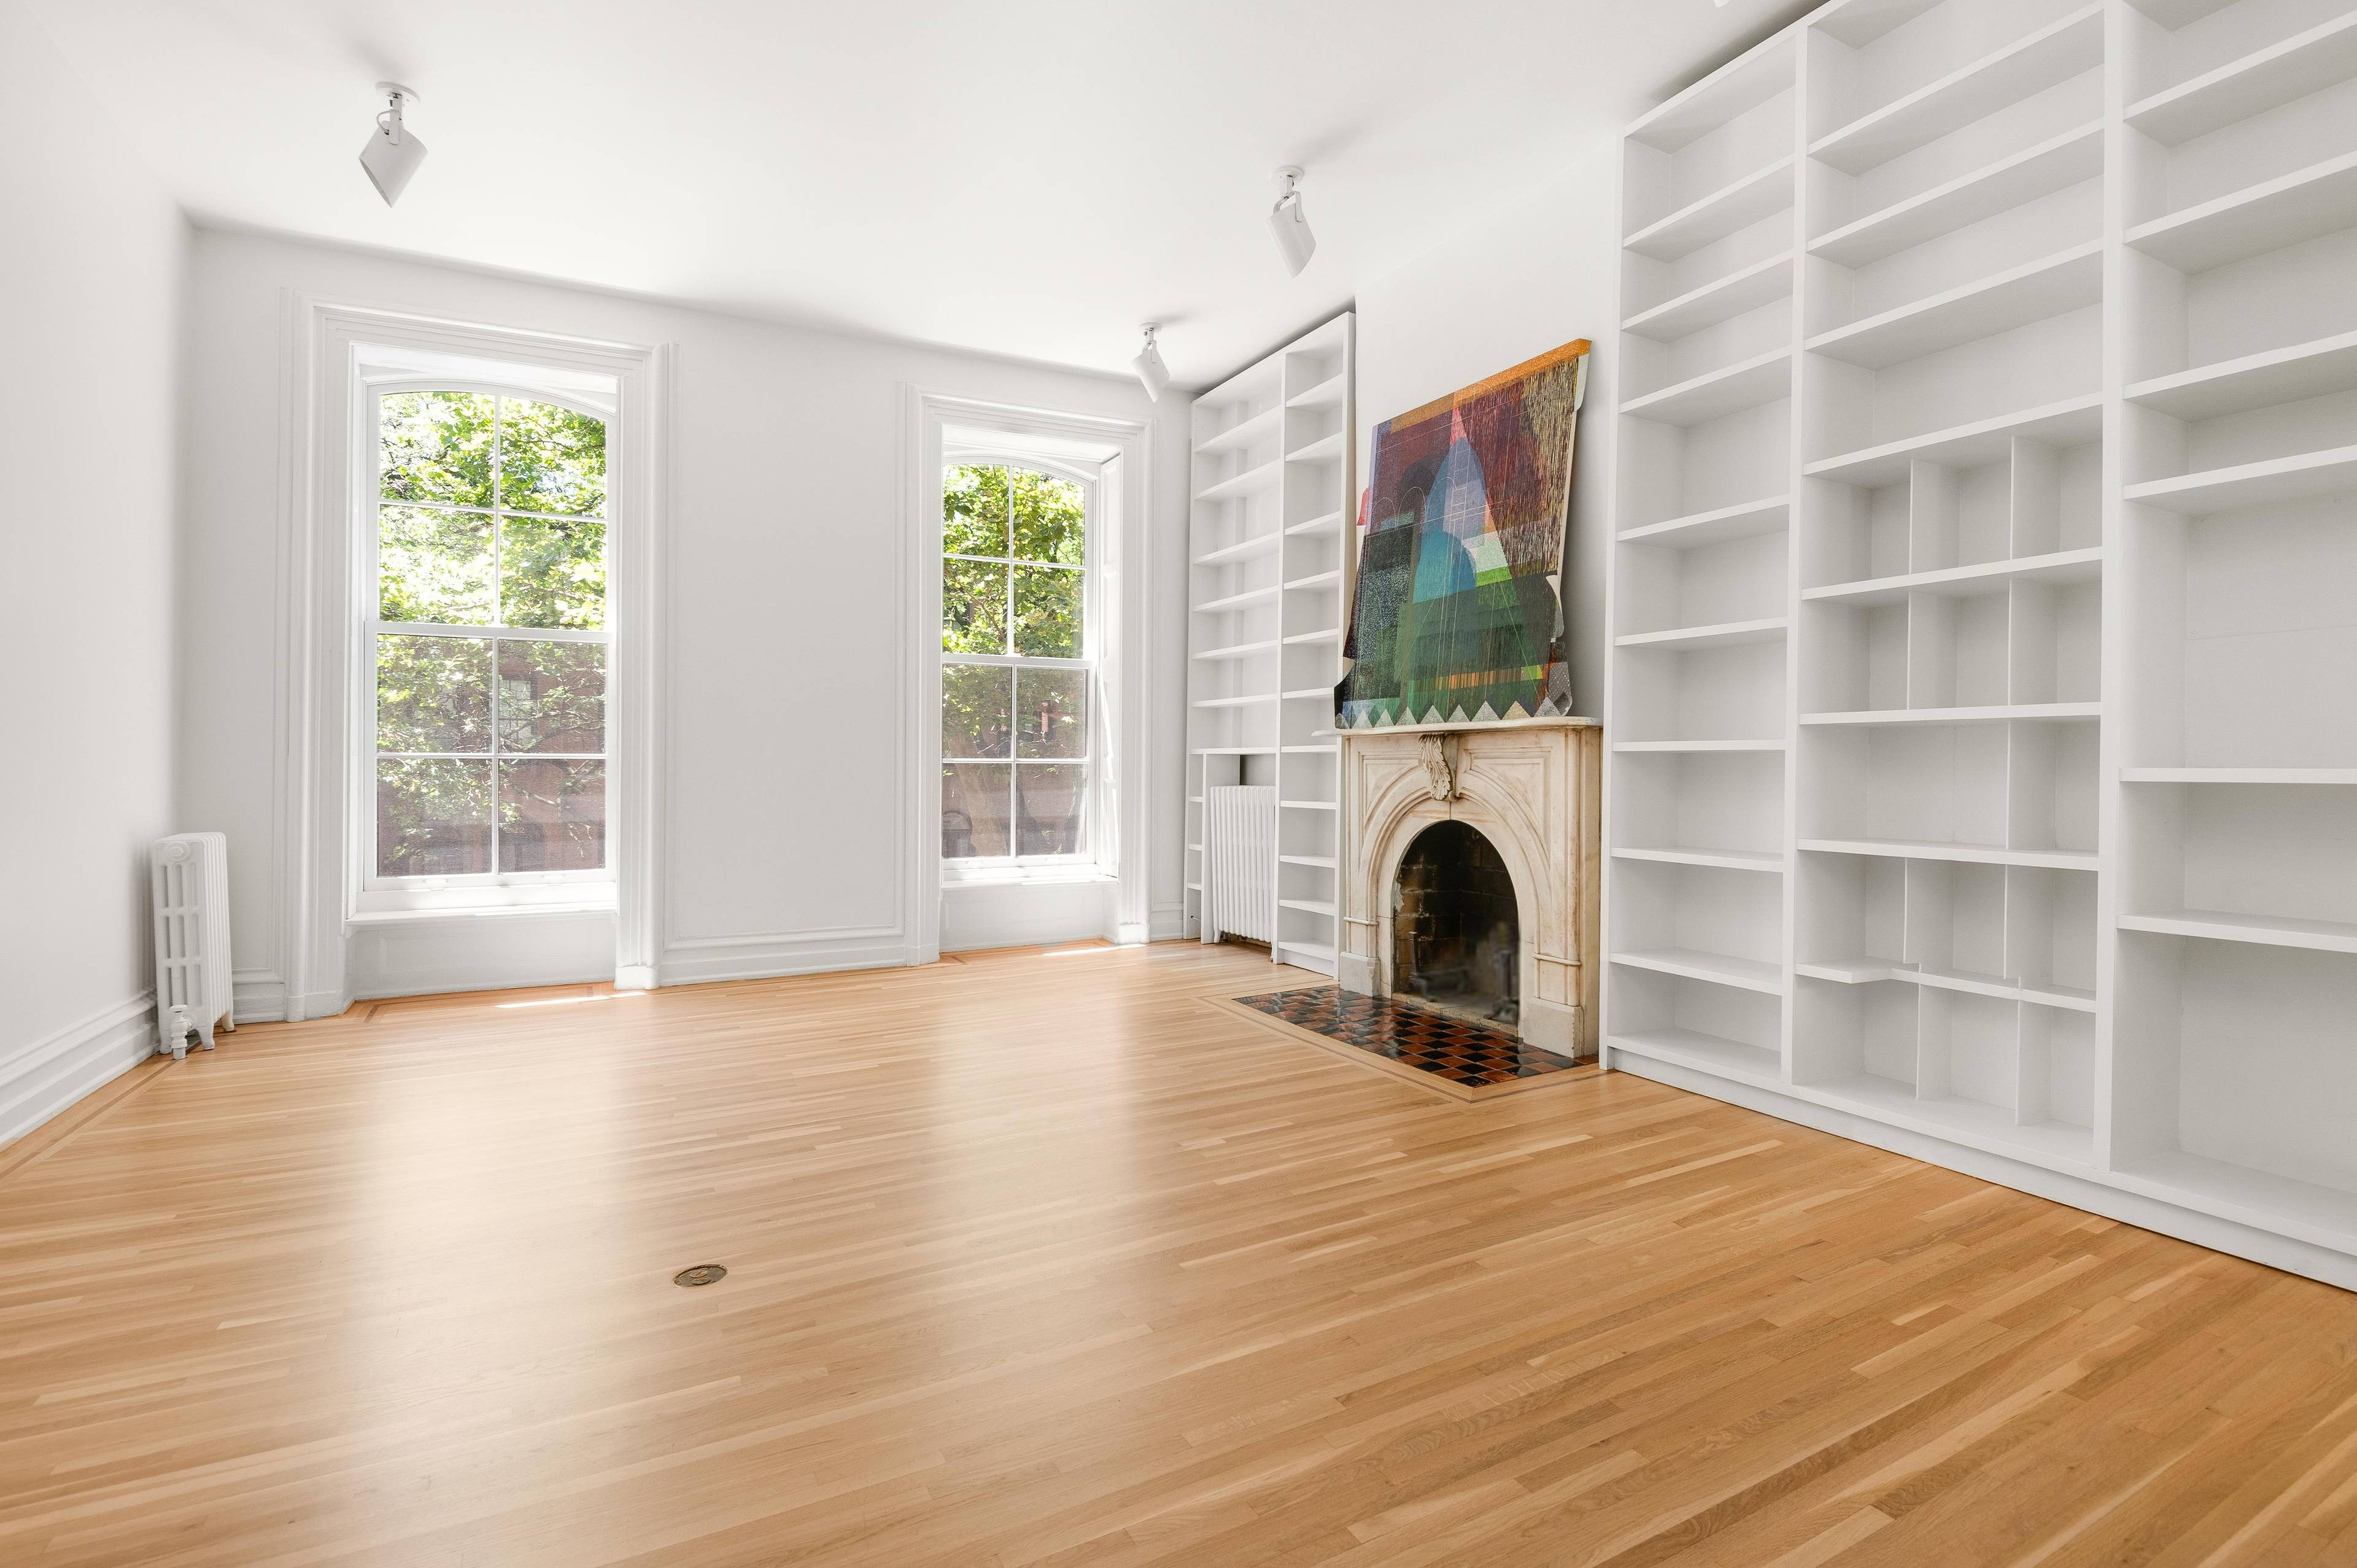 Well appointed 231 Kane Street, 5 bedroom, 2 full bathrooms pristinely renovated Welcome home to Townhouse living in prime Cobble Hill !